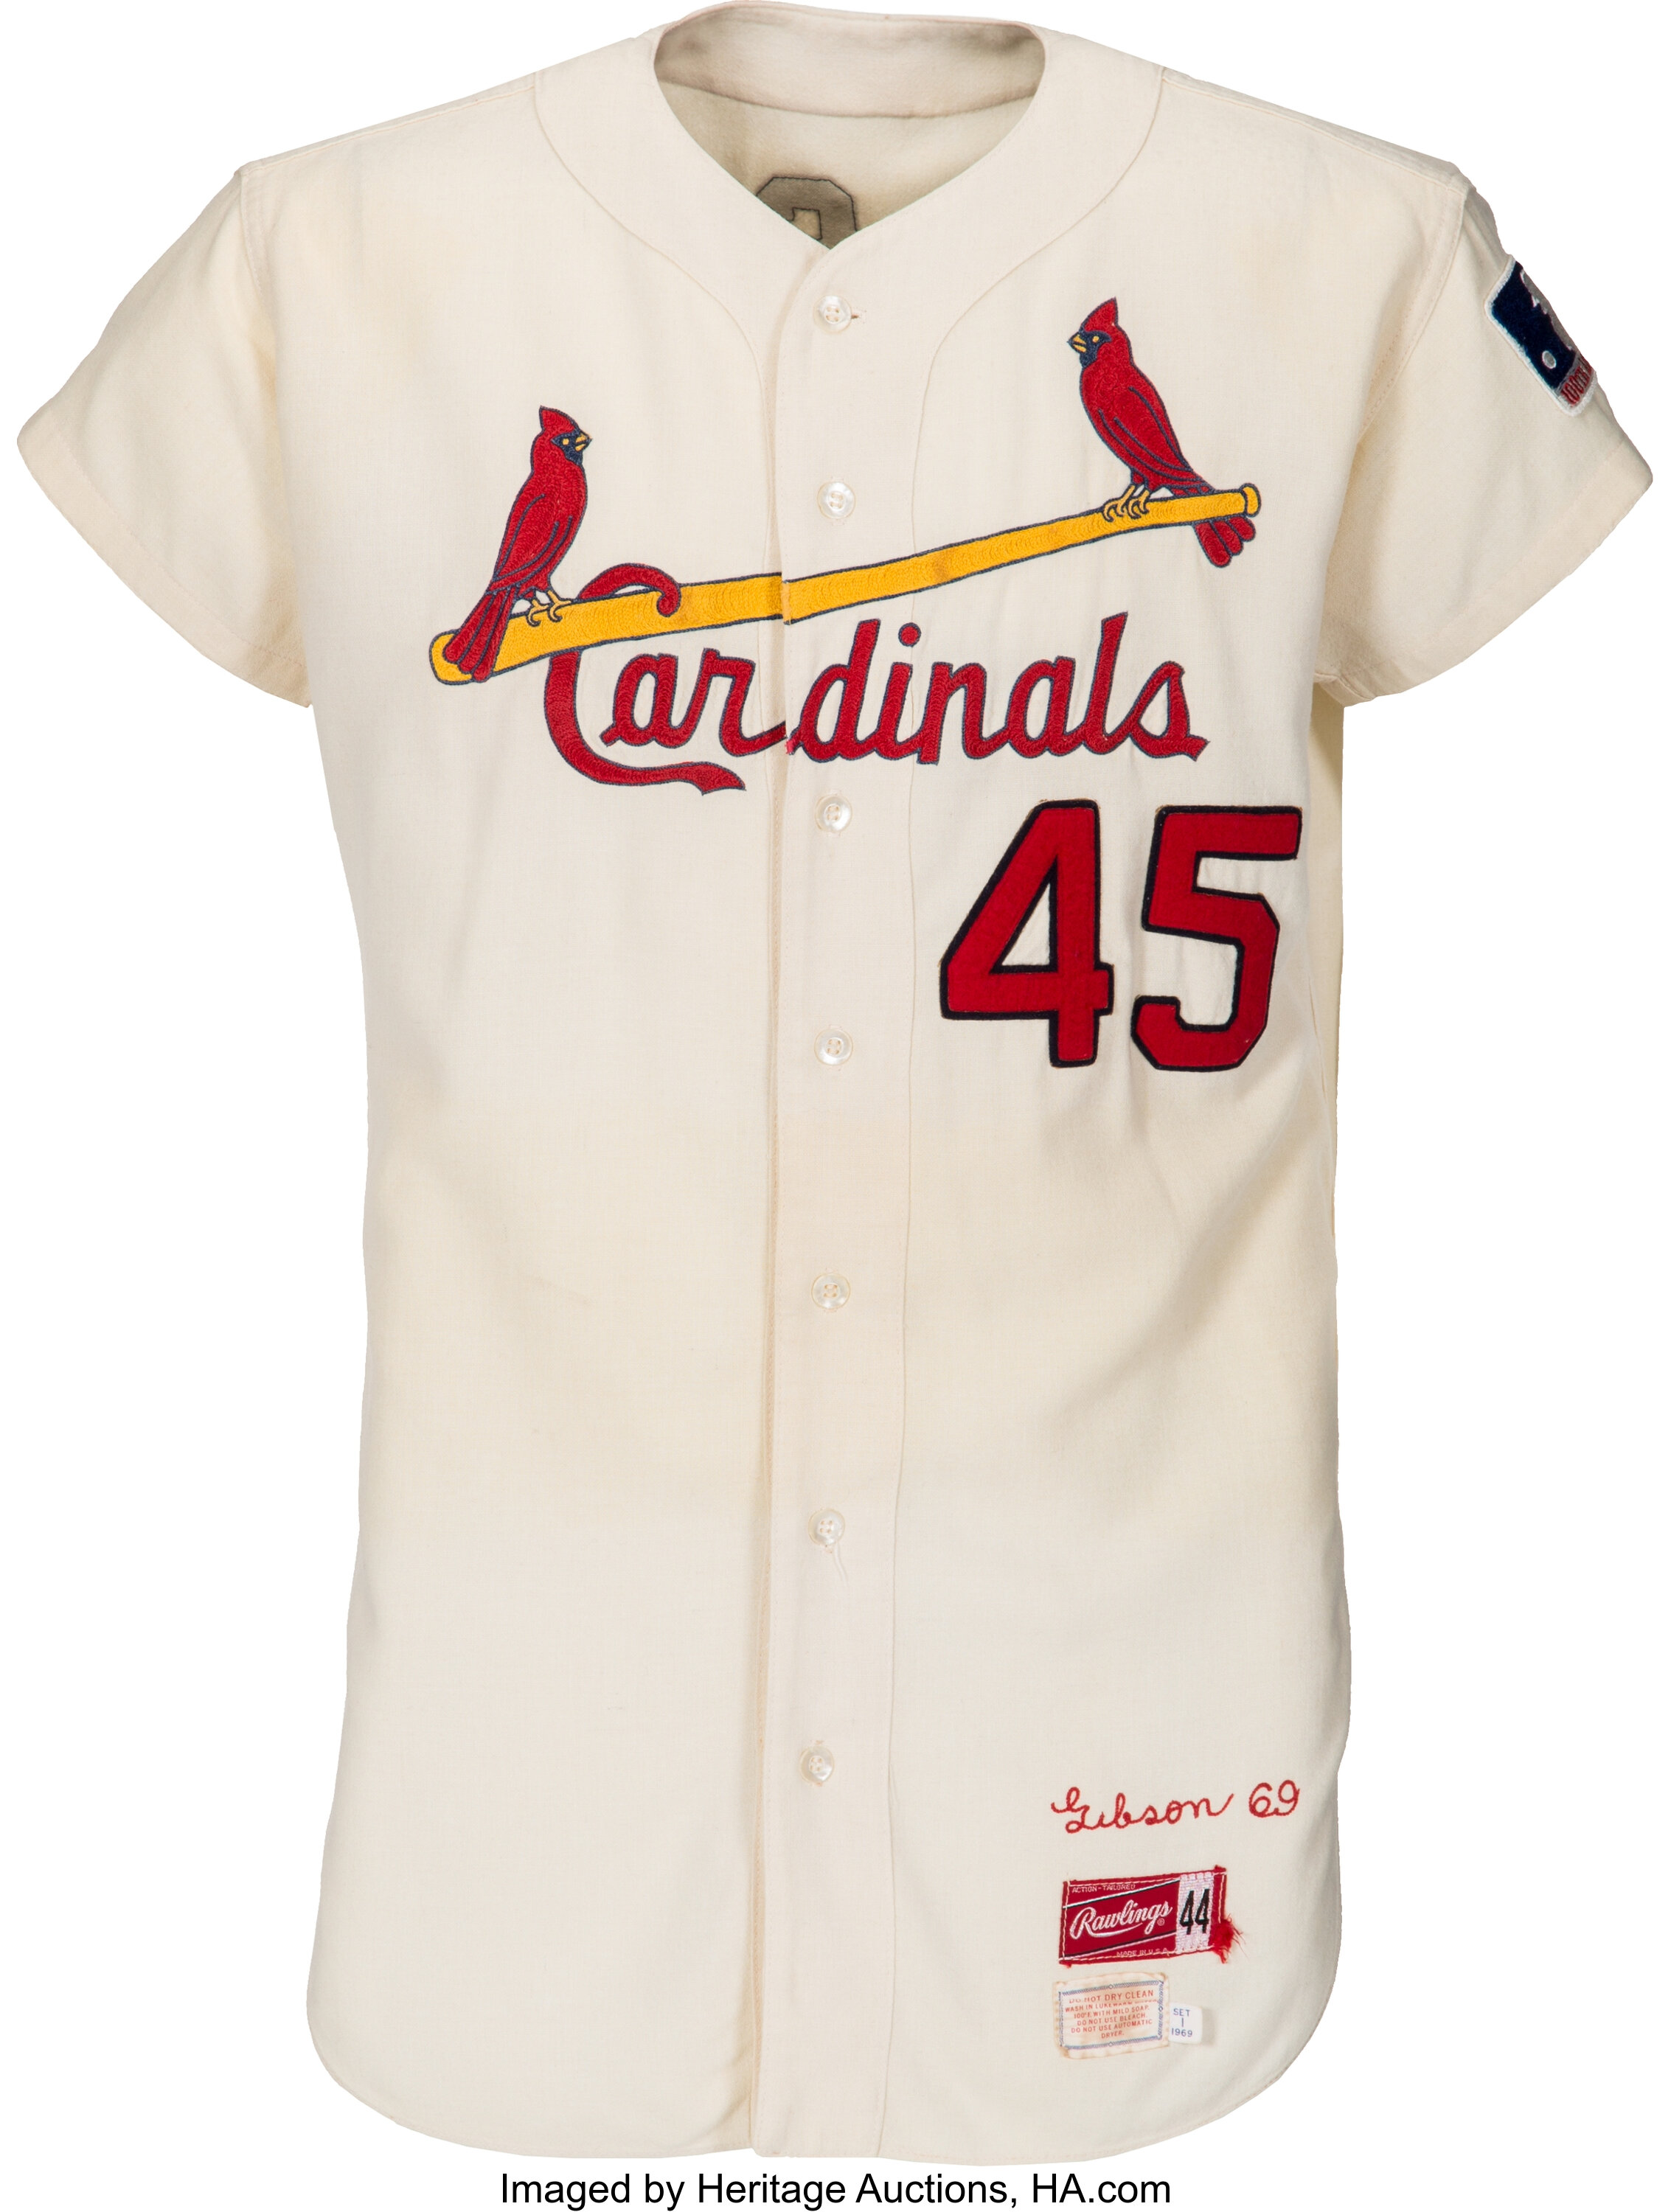 Authentic Jersey St. Louis Cardinals Home 1964 Bob Gibson - Shop Mitchell &  Ness Authentic Jerseys and Replicas Mitchell & Ness Nostalgia Co.